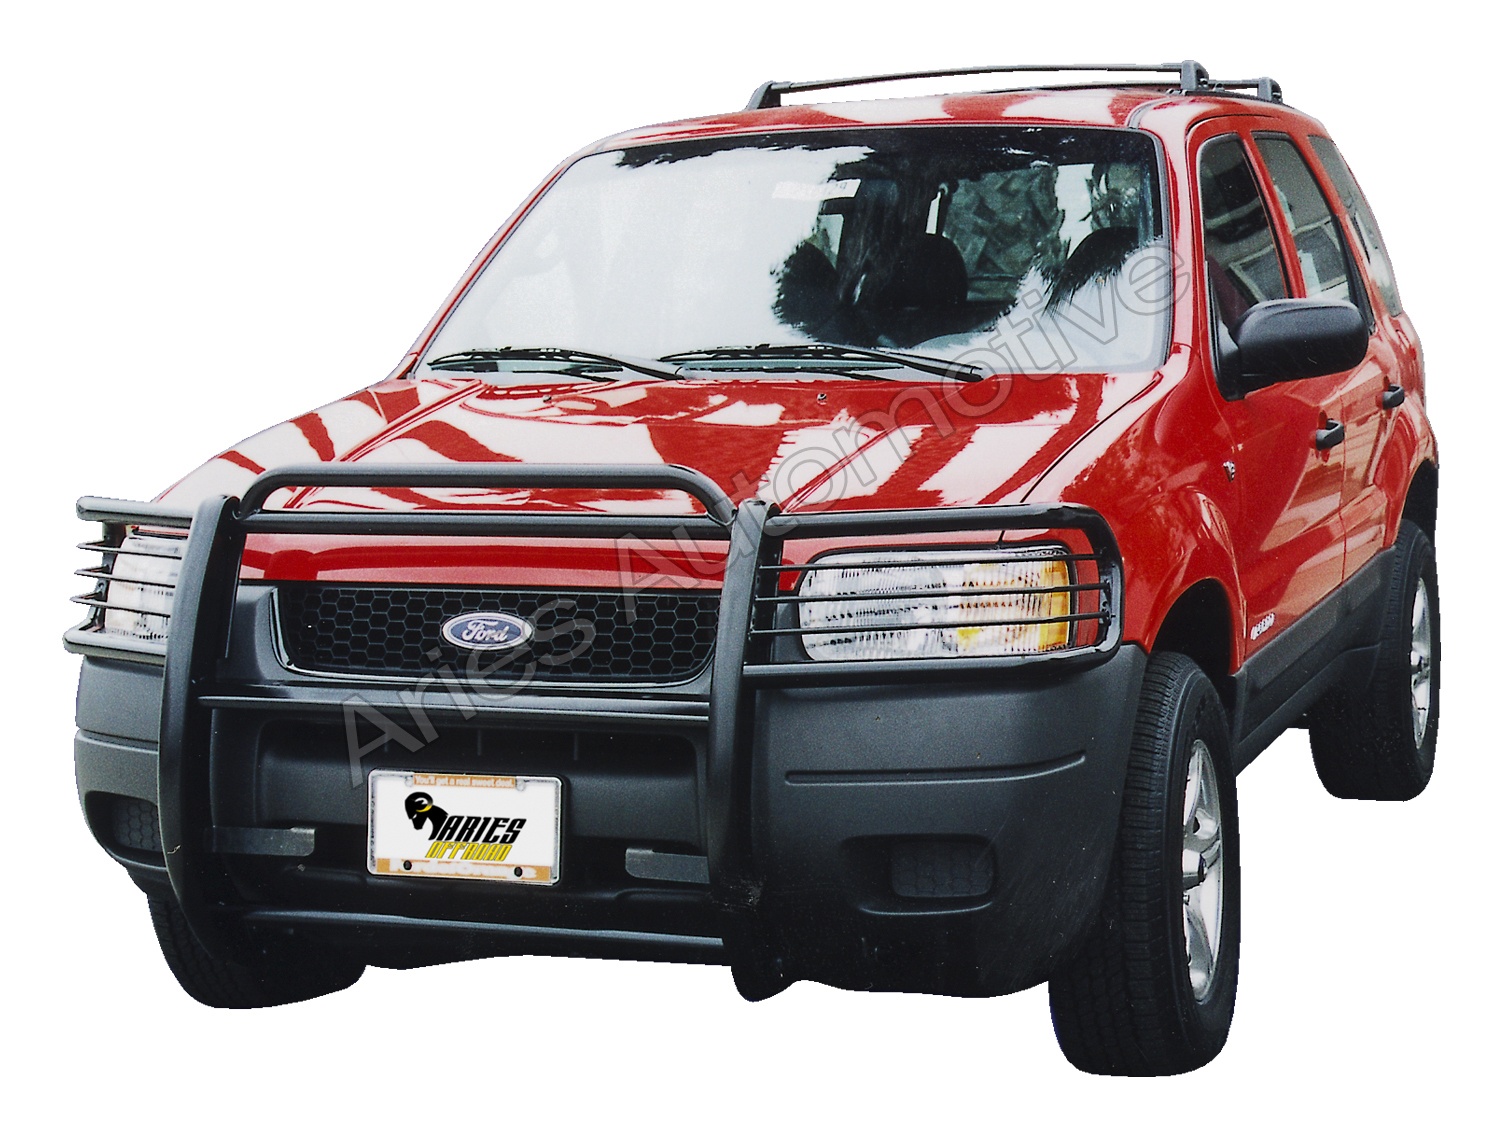 Aries Offroad Aries Offroad 3049 The Aries Bar; Grille/Brush Guard Fits 02-04 Escape